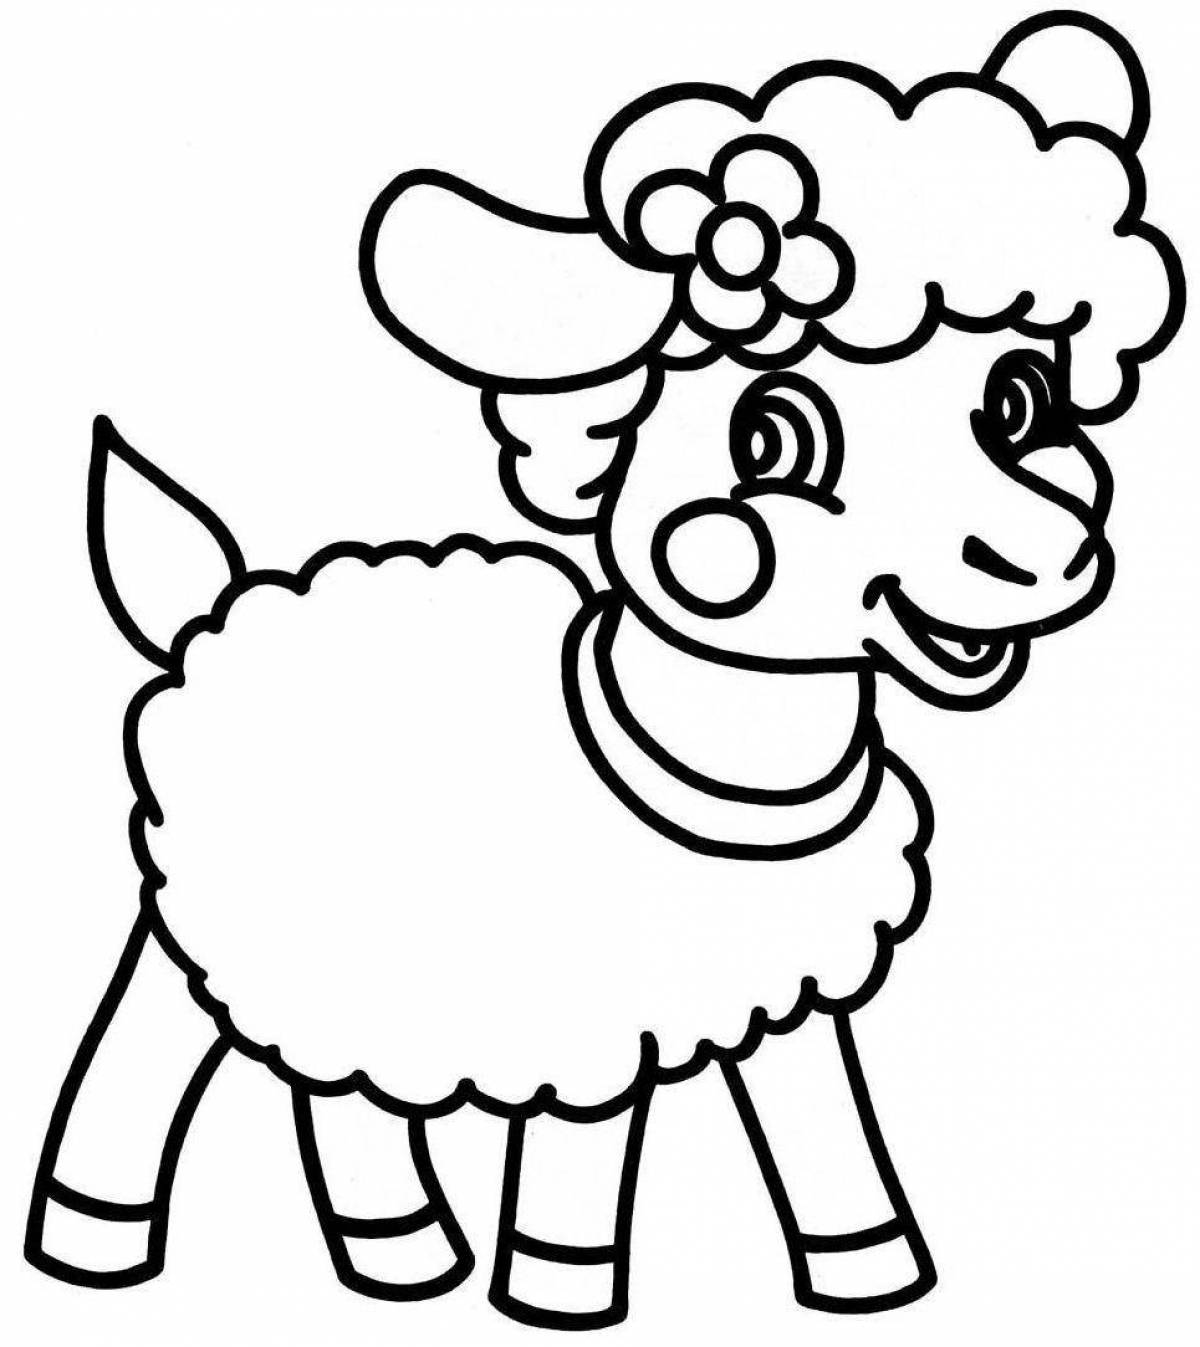 Children's ram coloring pages